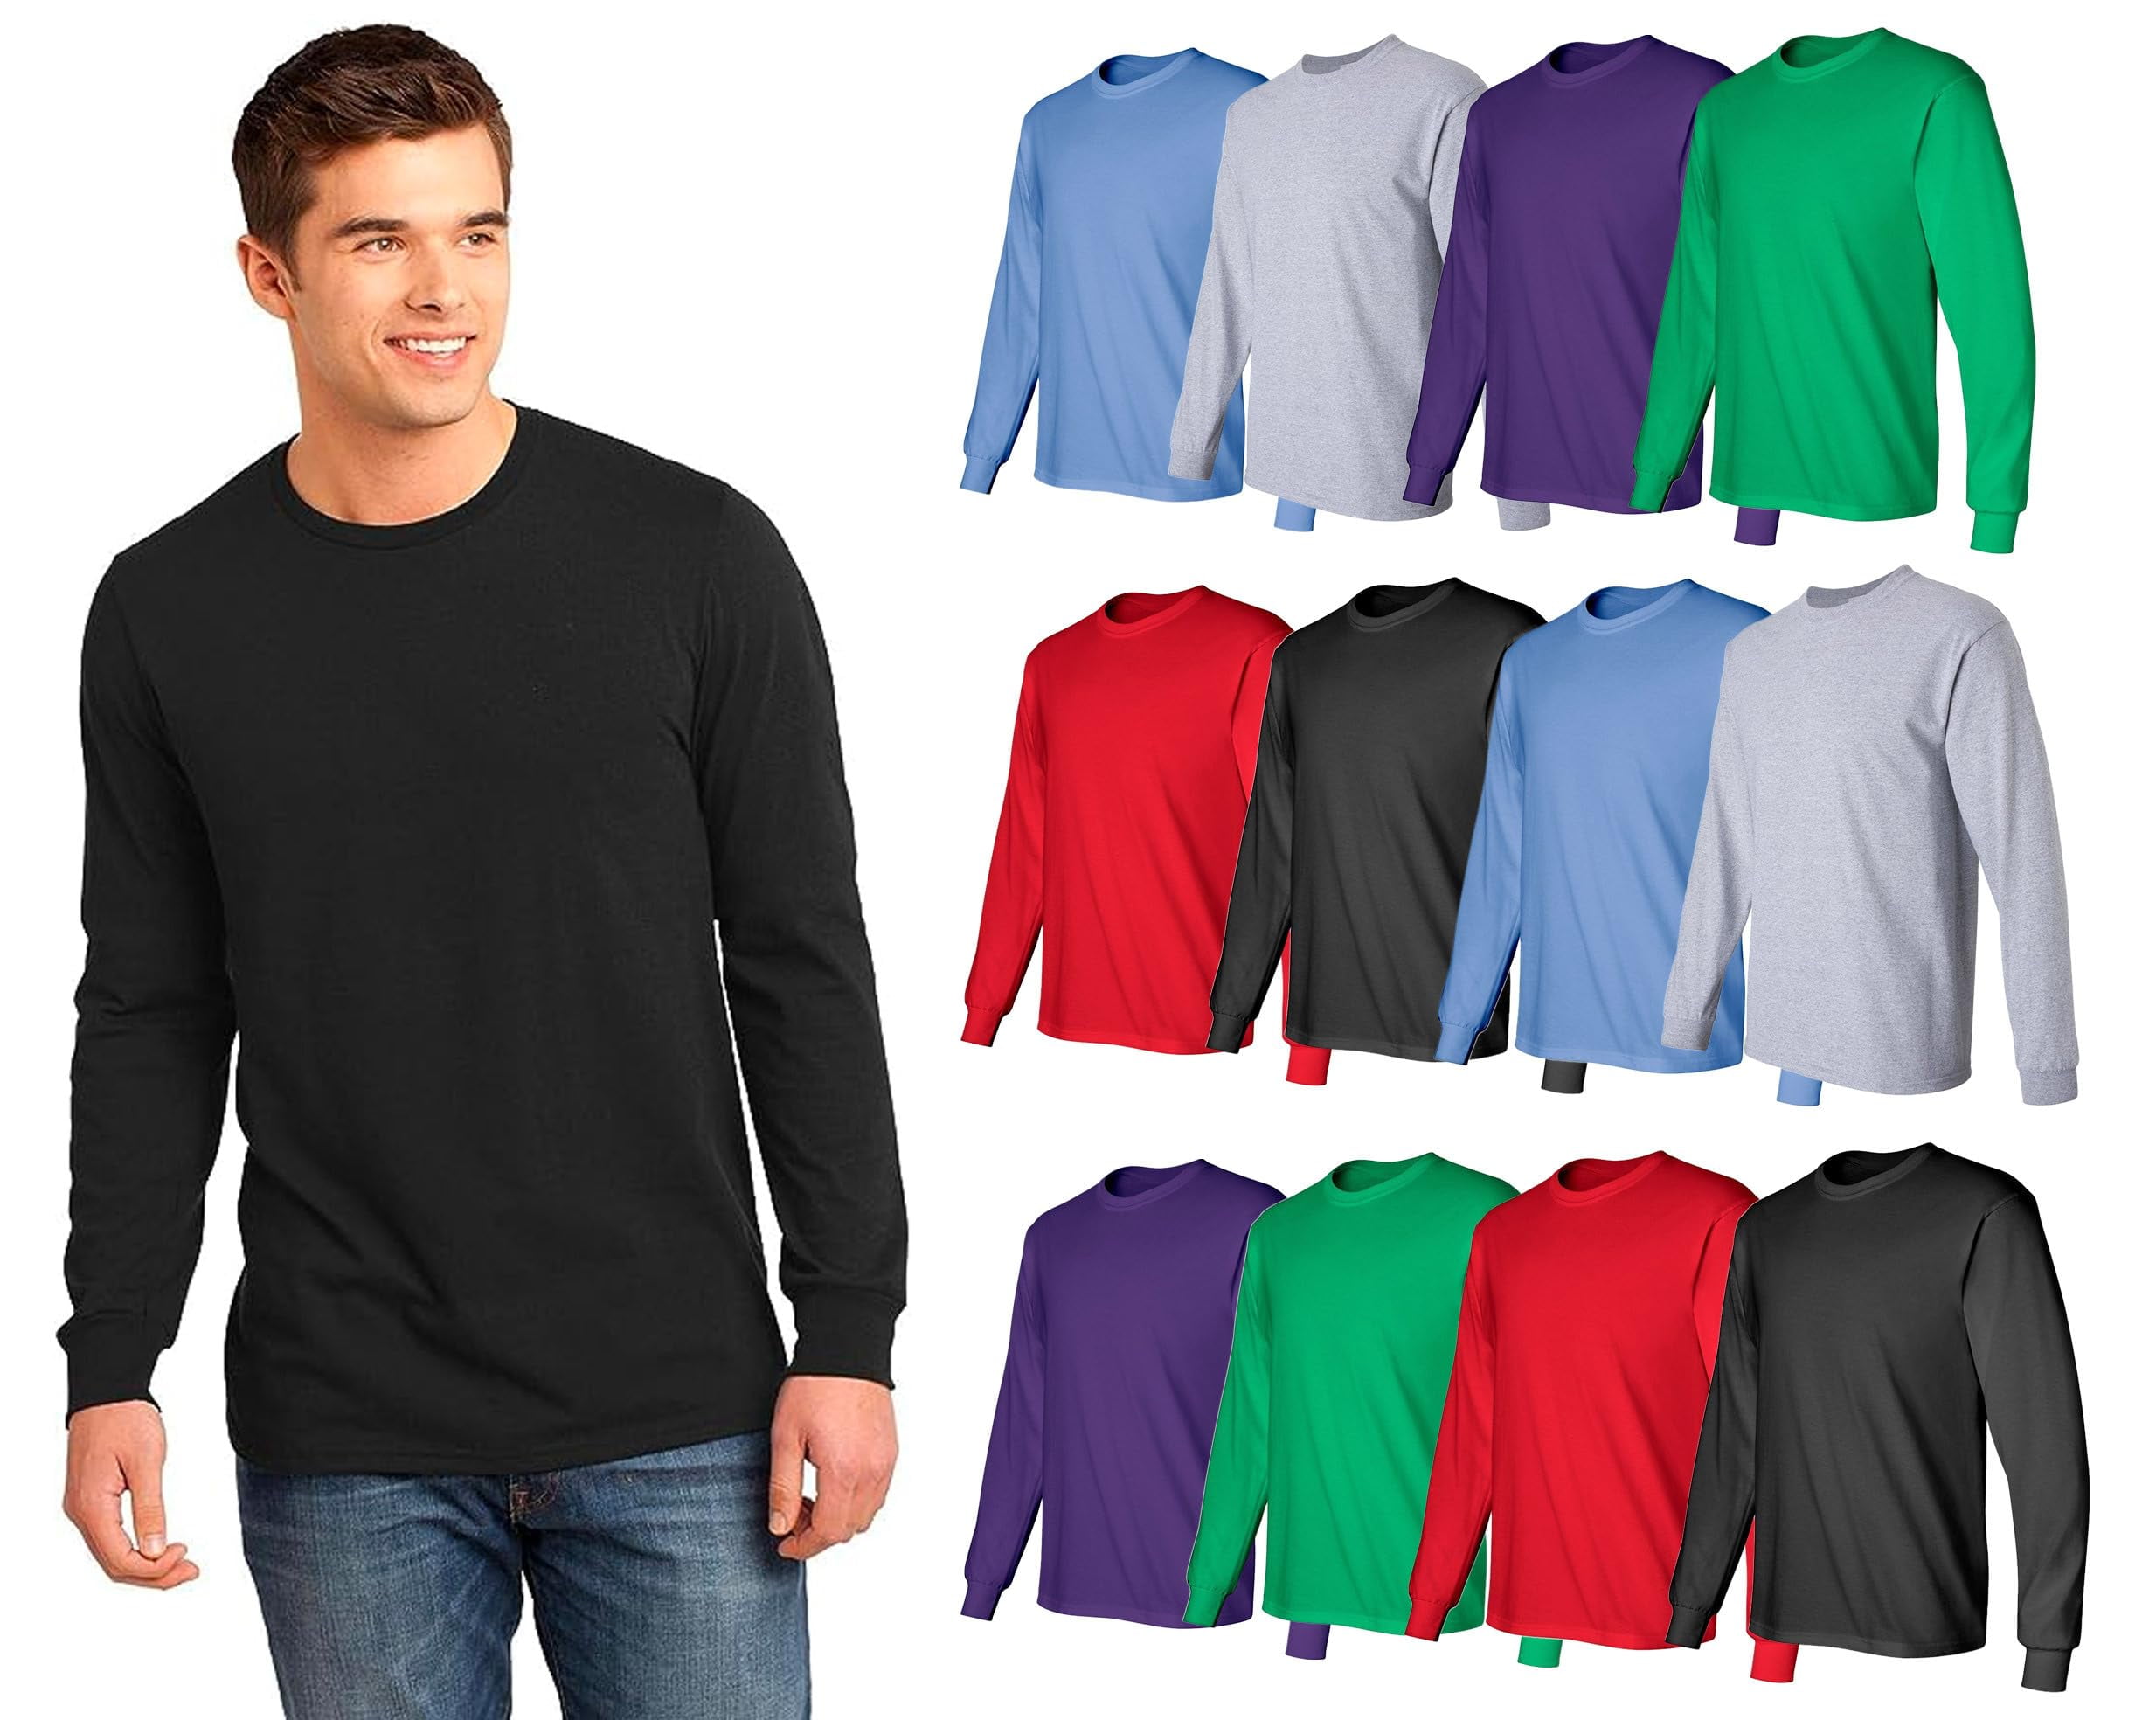 Mens Long Sleeve Colorful T-Shirts, 100% Cotton - Crew Neck Bulk Tees For  Men, Wholesale Sleeved TShirt Packs (12 Pack Long Sleeve, Small)